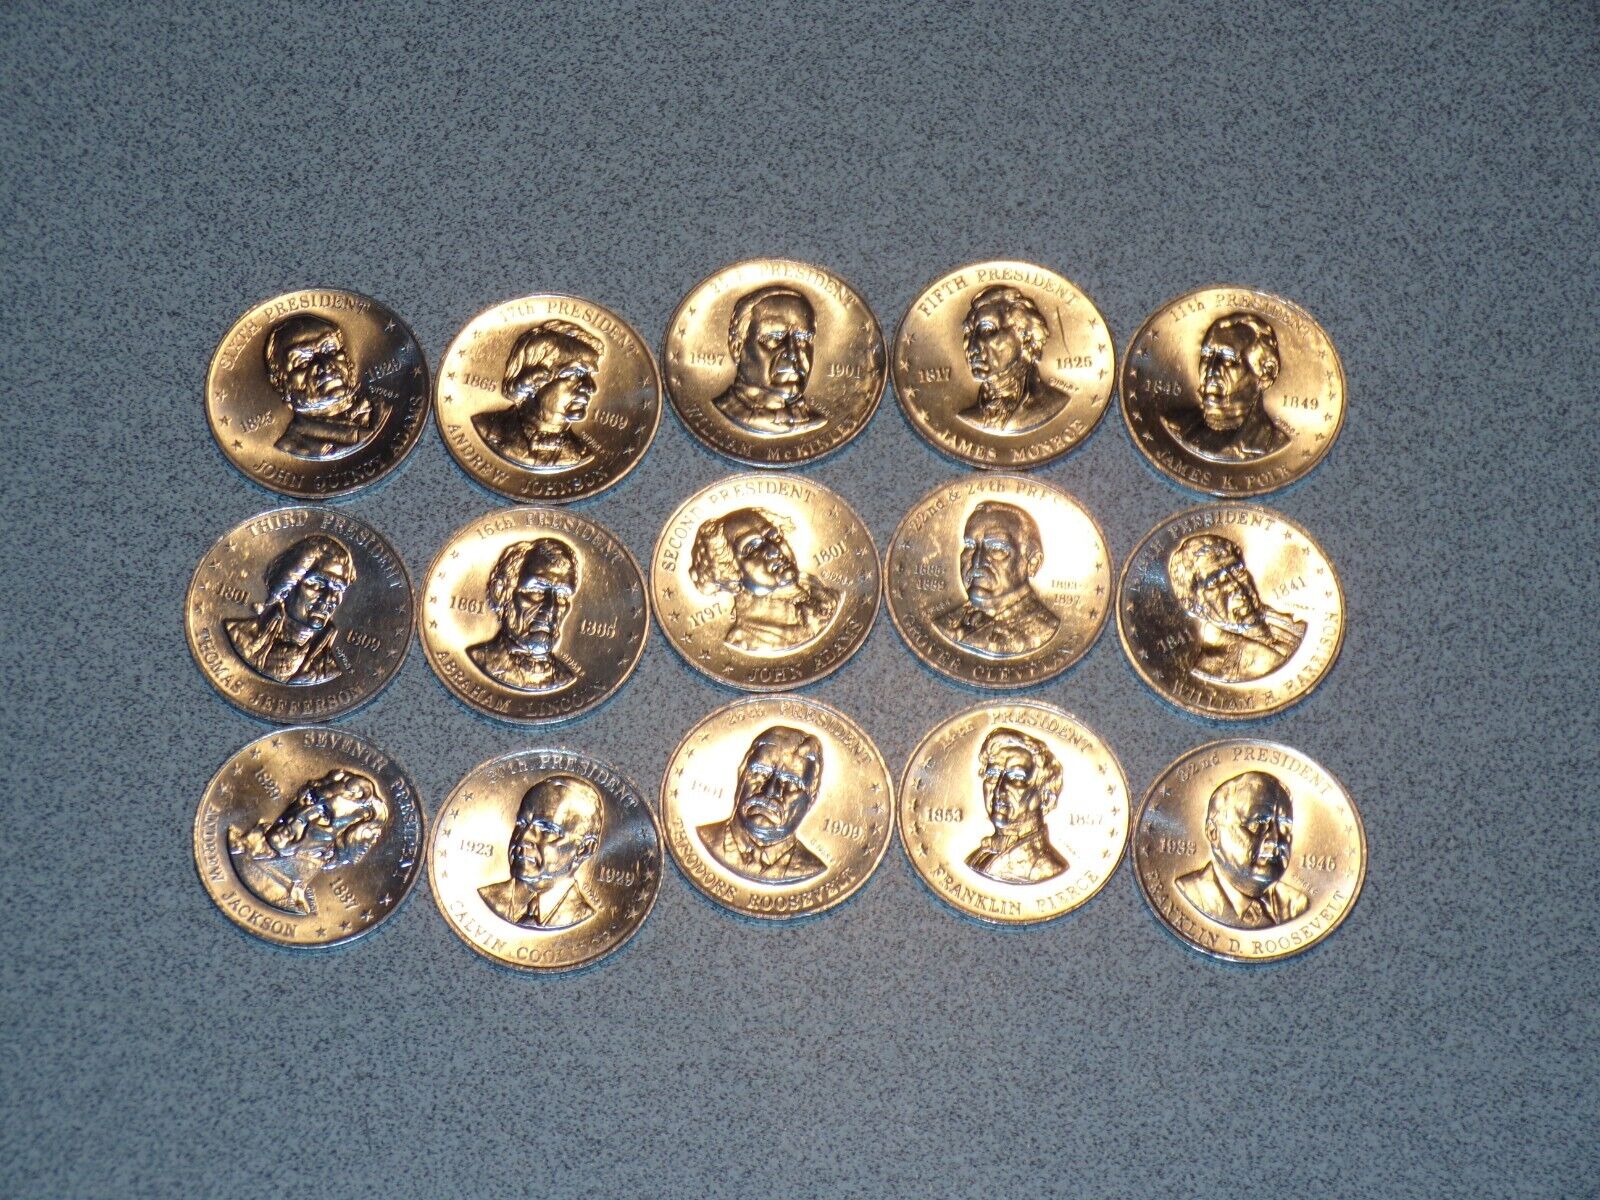 Coins Shell's Mr. President Coin Game 15 no duplicates Lincoln Polk Roosevelt